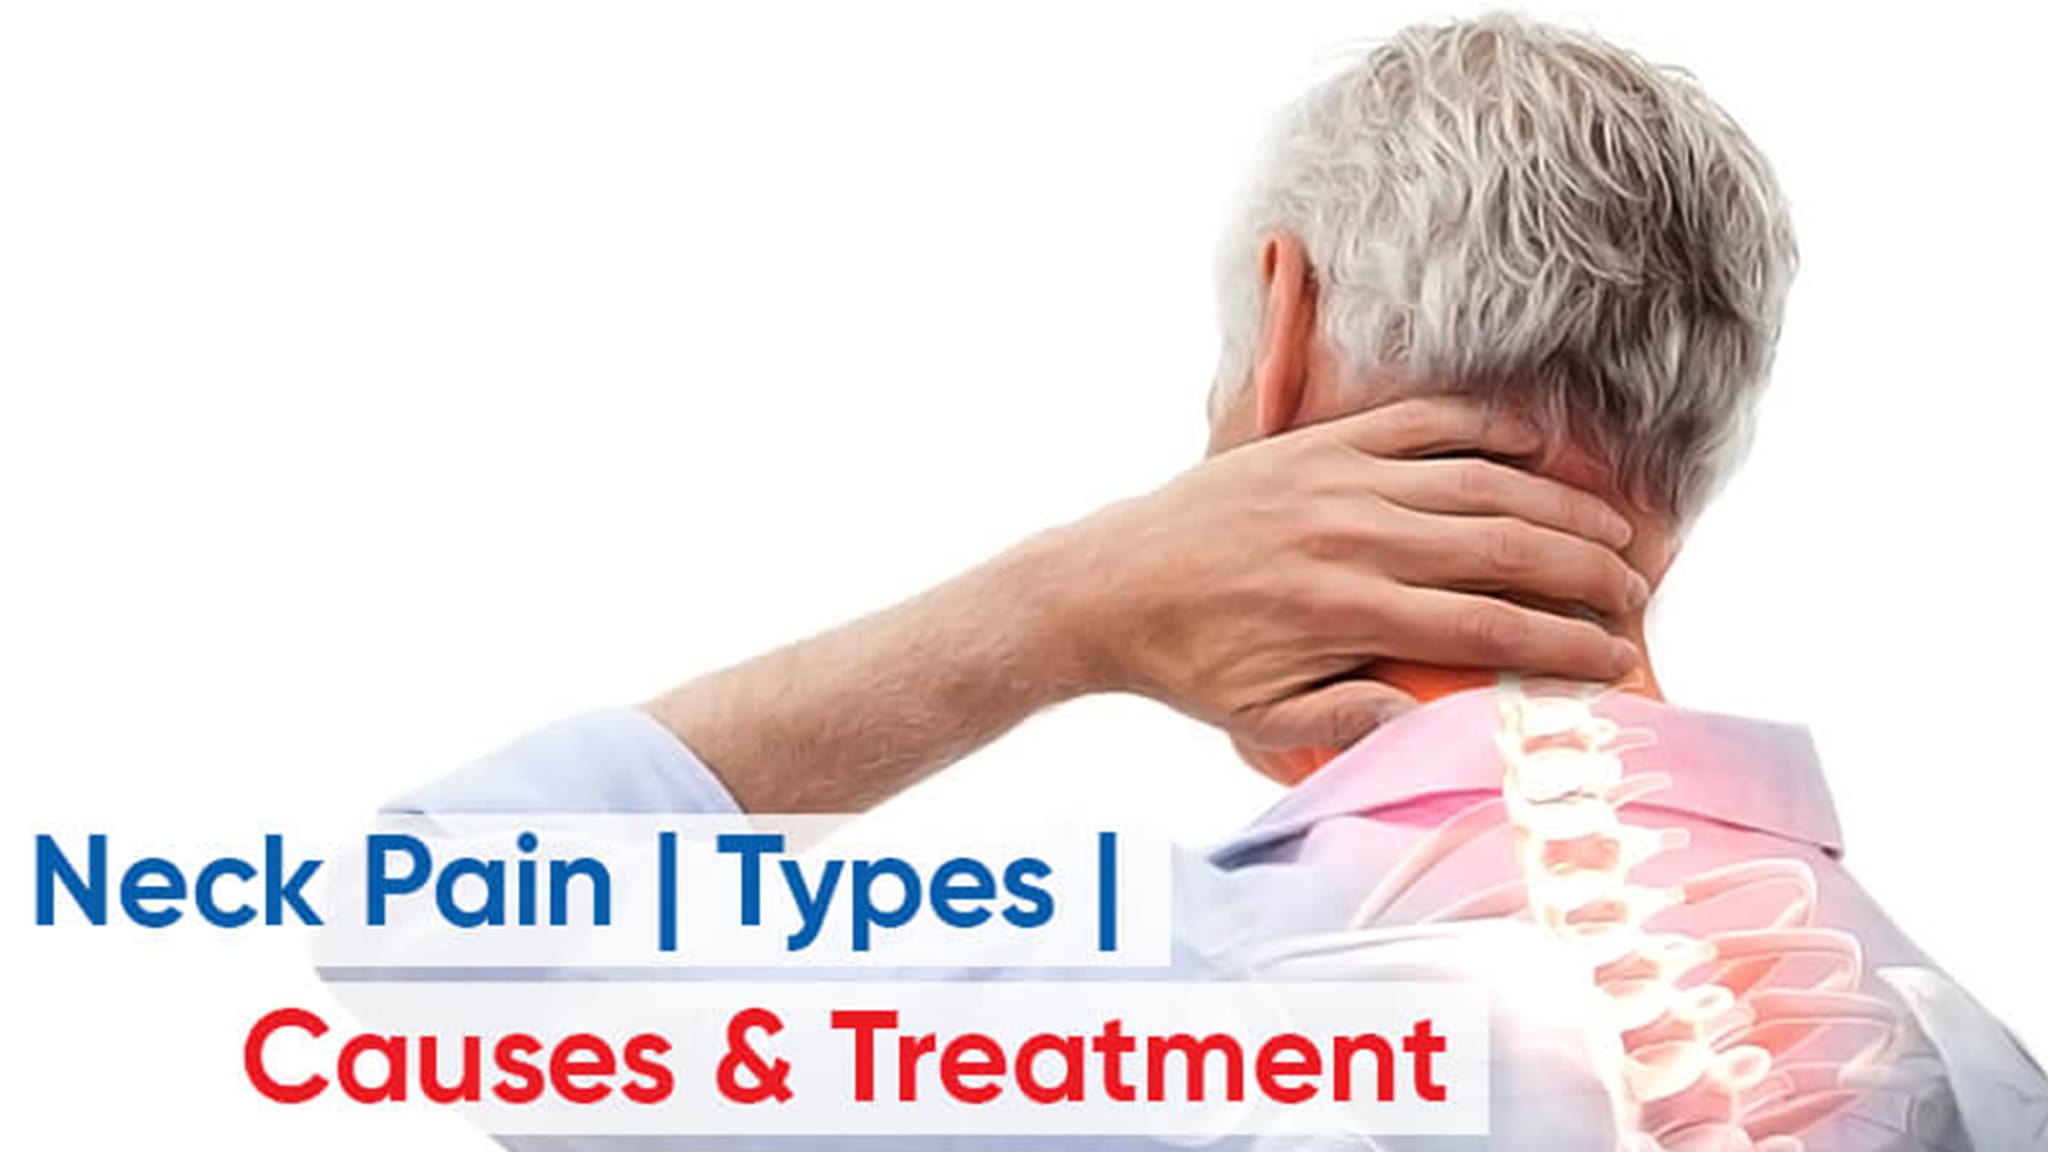 https://bioflex.pk/wp-content/uploads/2020/06/Treating-Chronic-Neck-Pain-with-Laser-Pain-Therapy-min.jpg